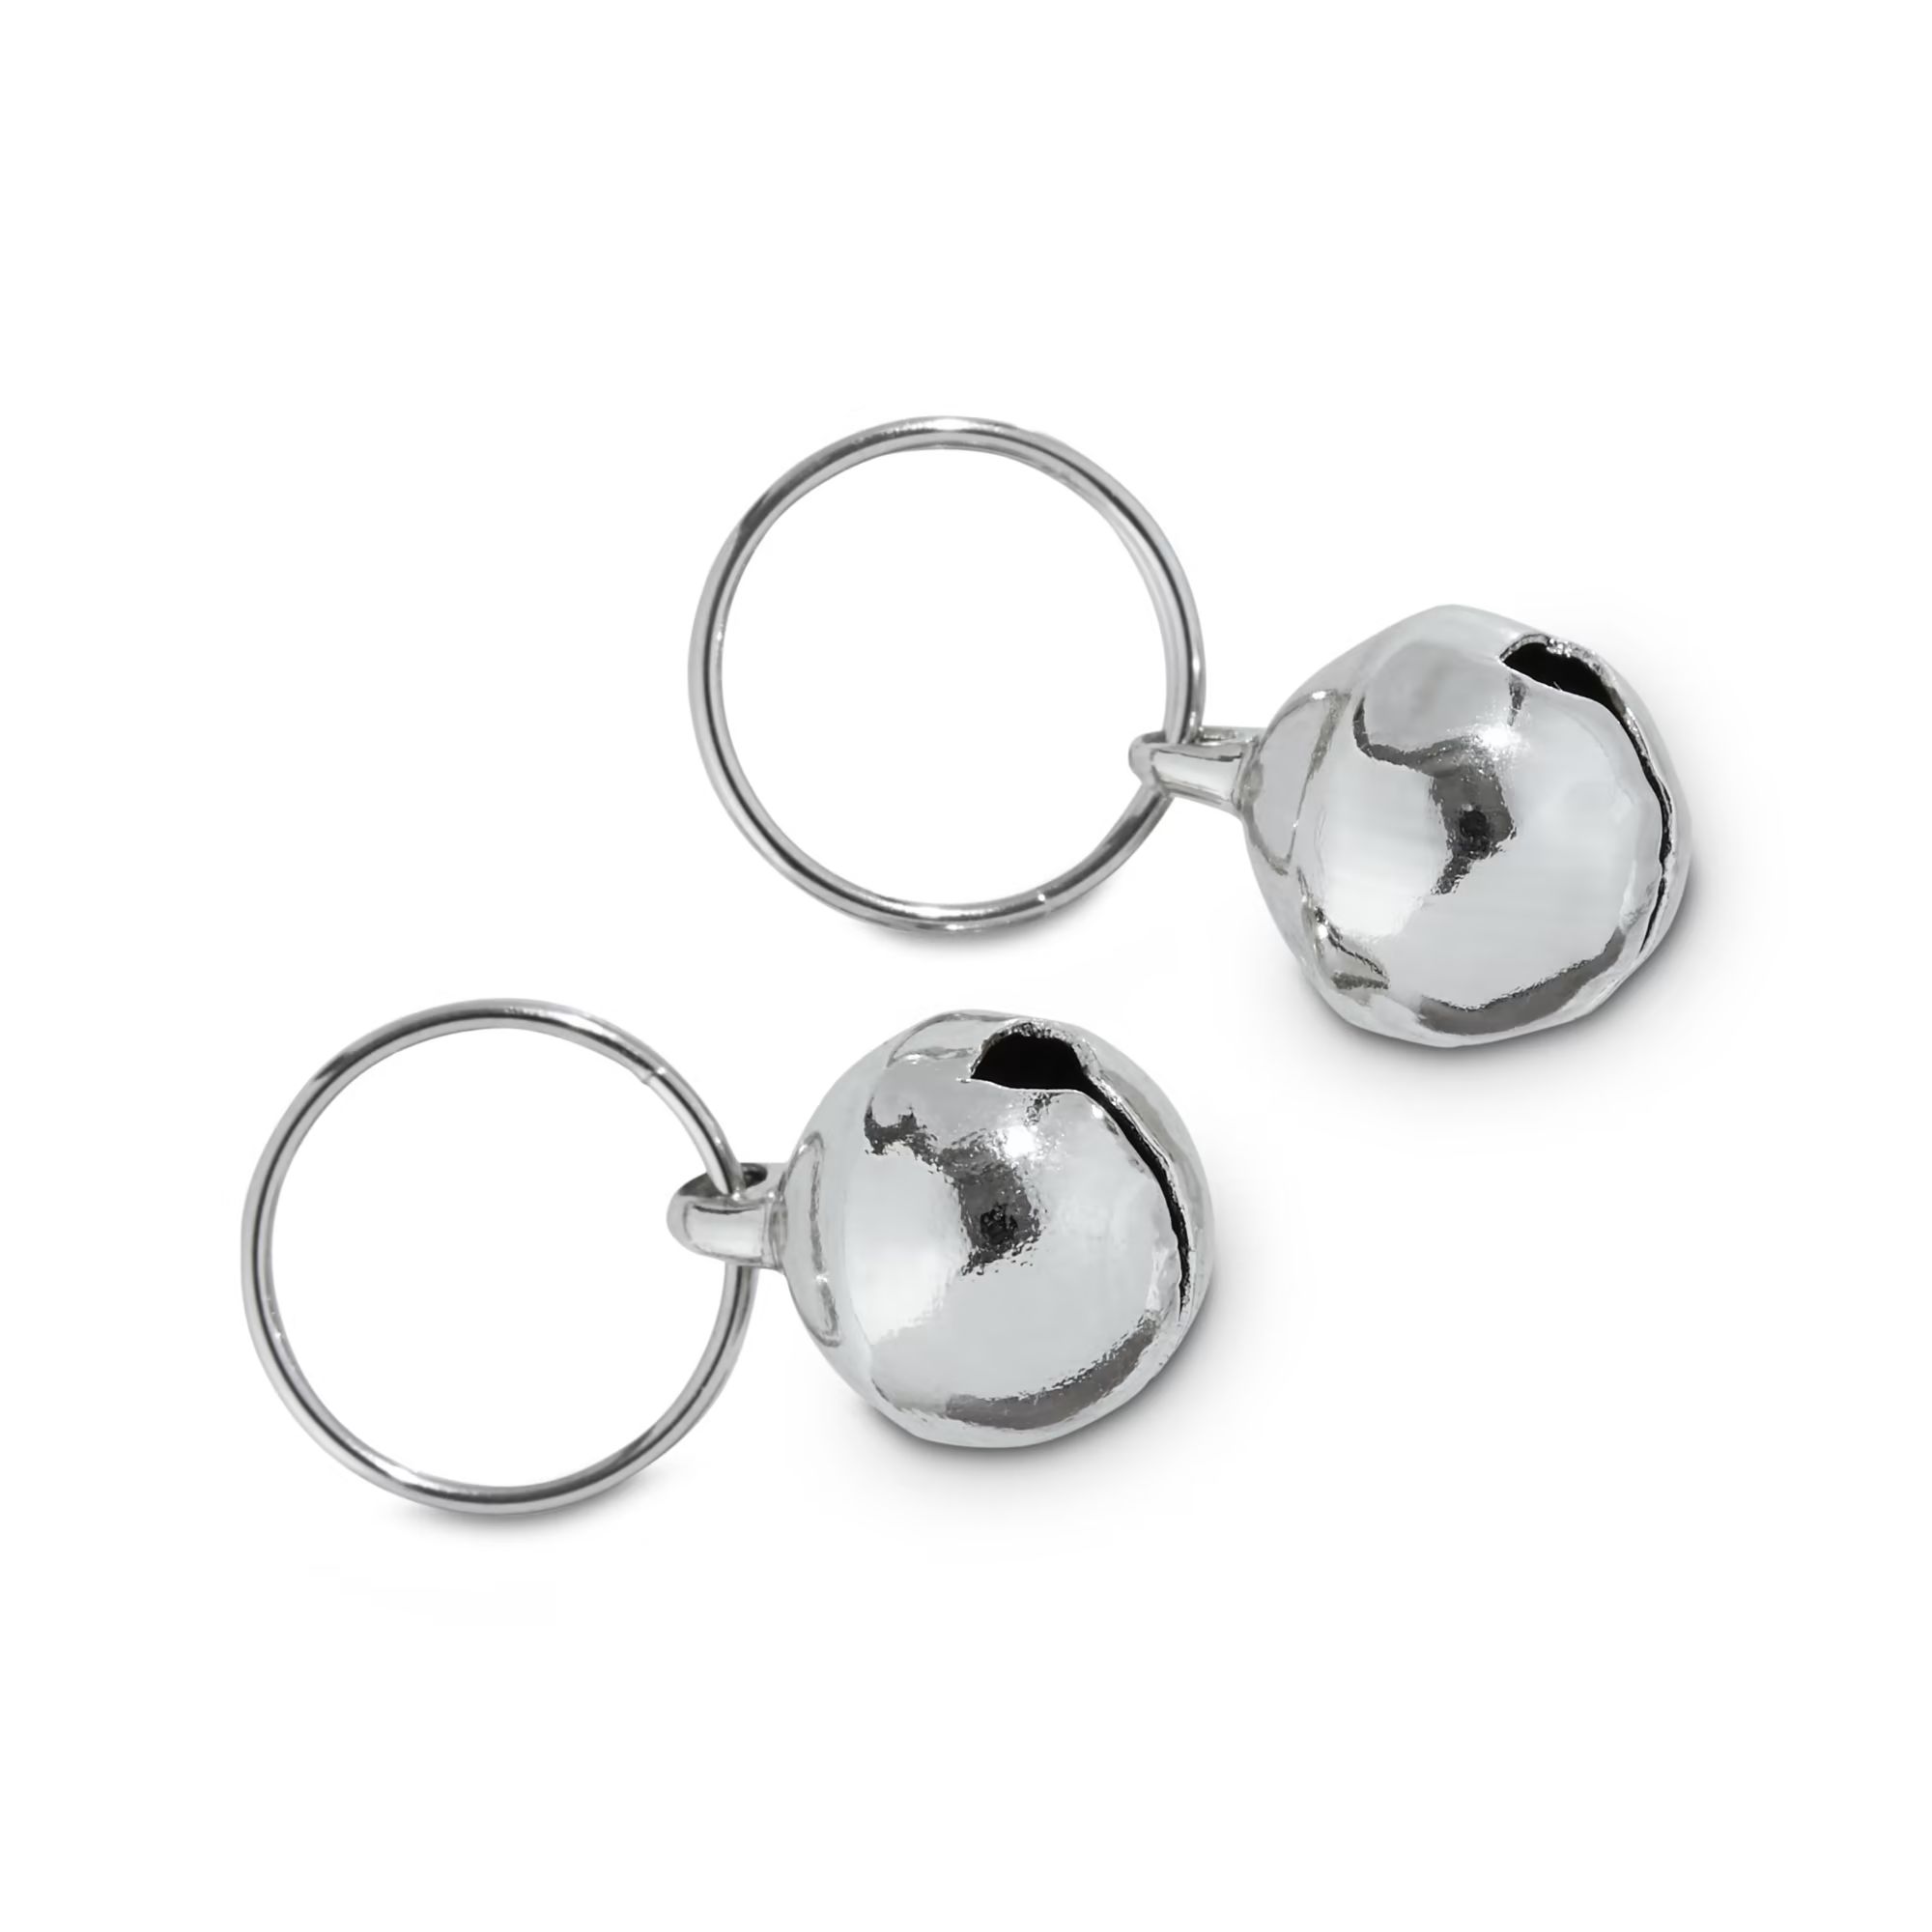 Bond & Co. Silver Collar Bells for Cats, Pack of 2 | Petco